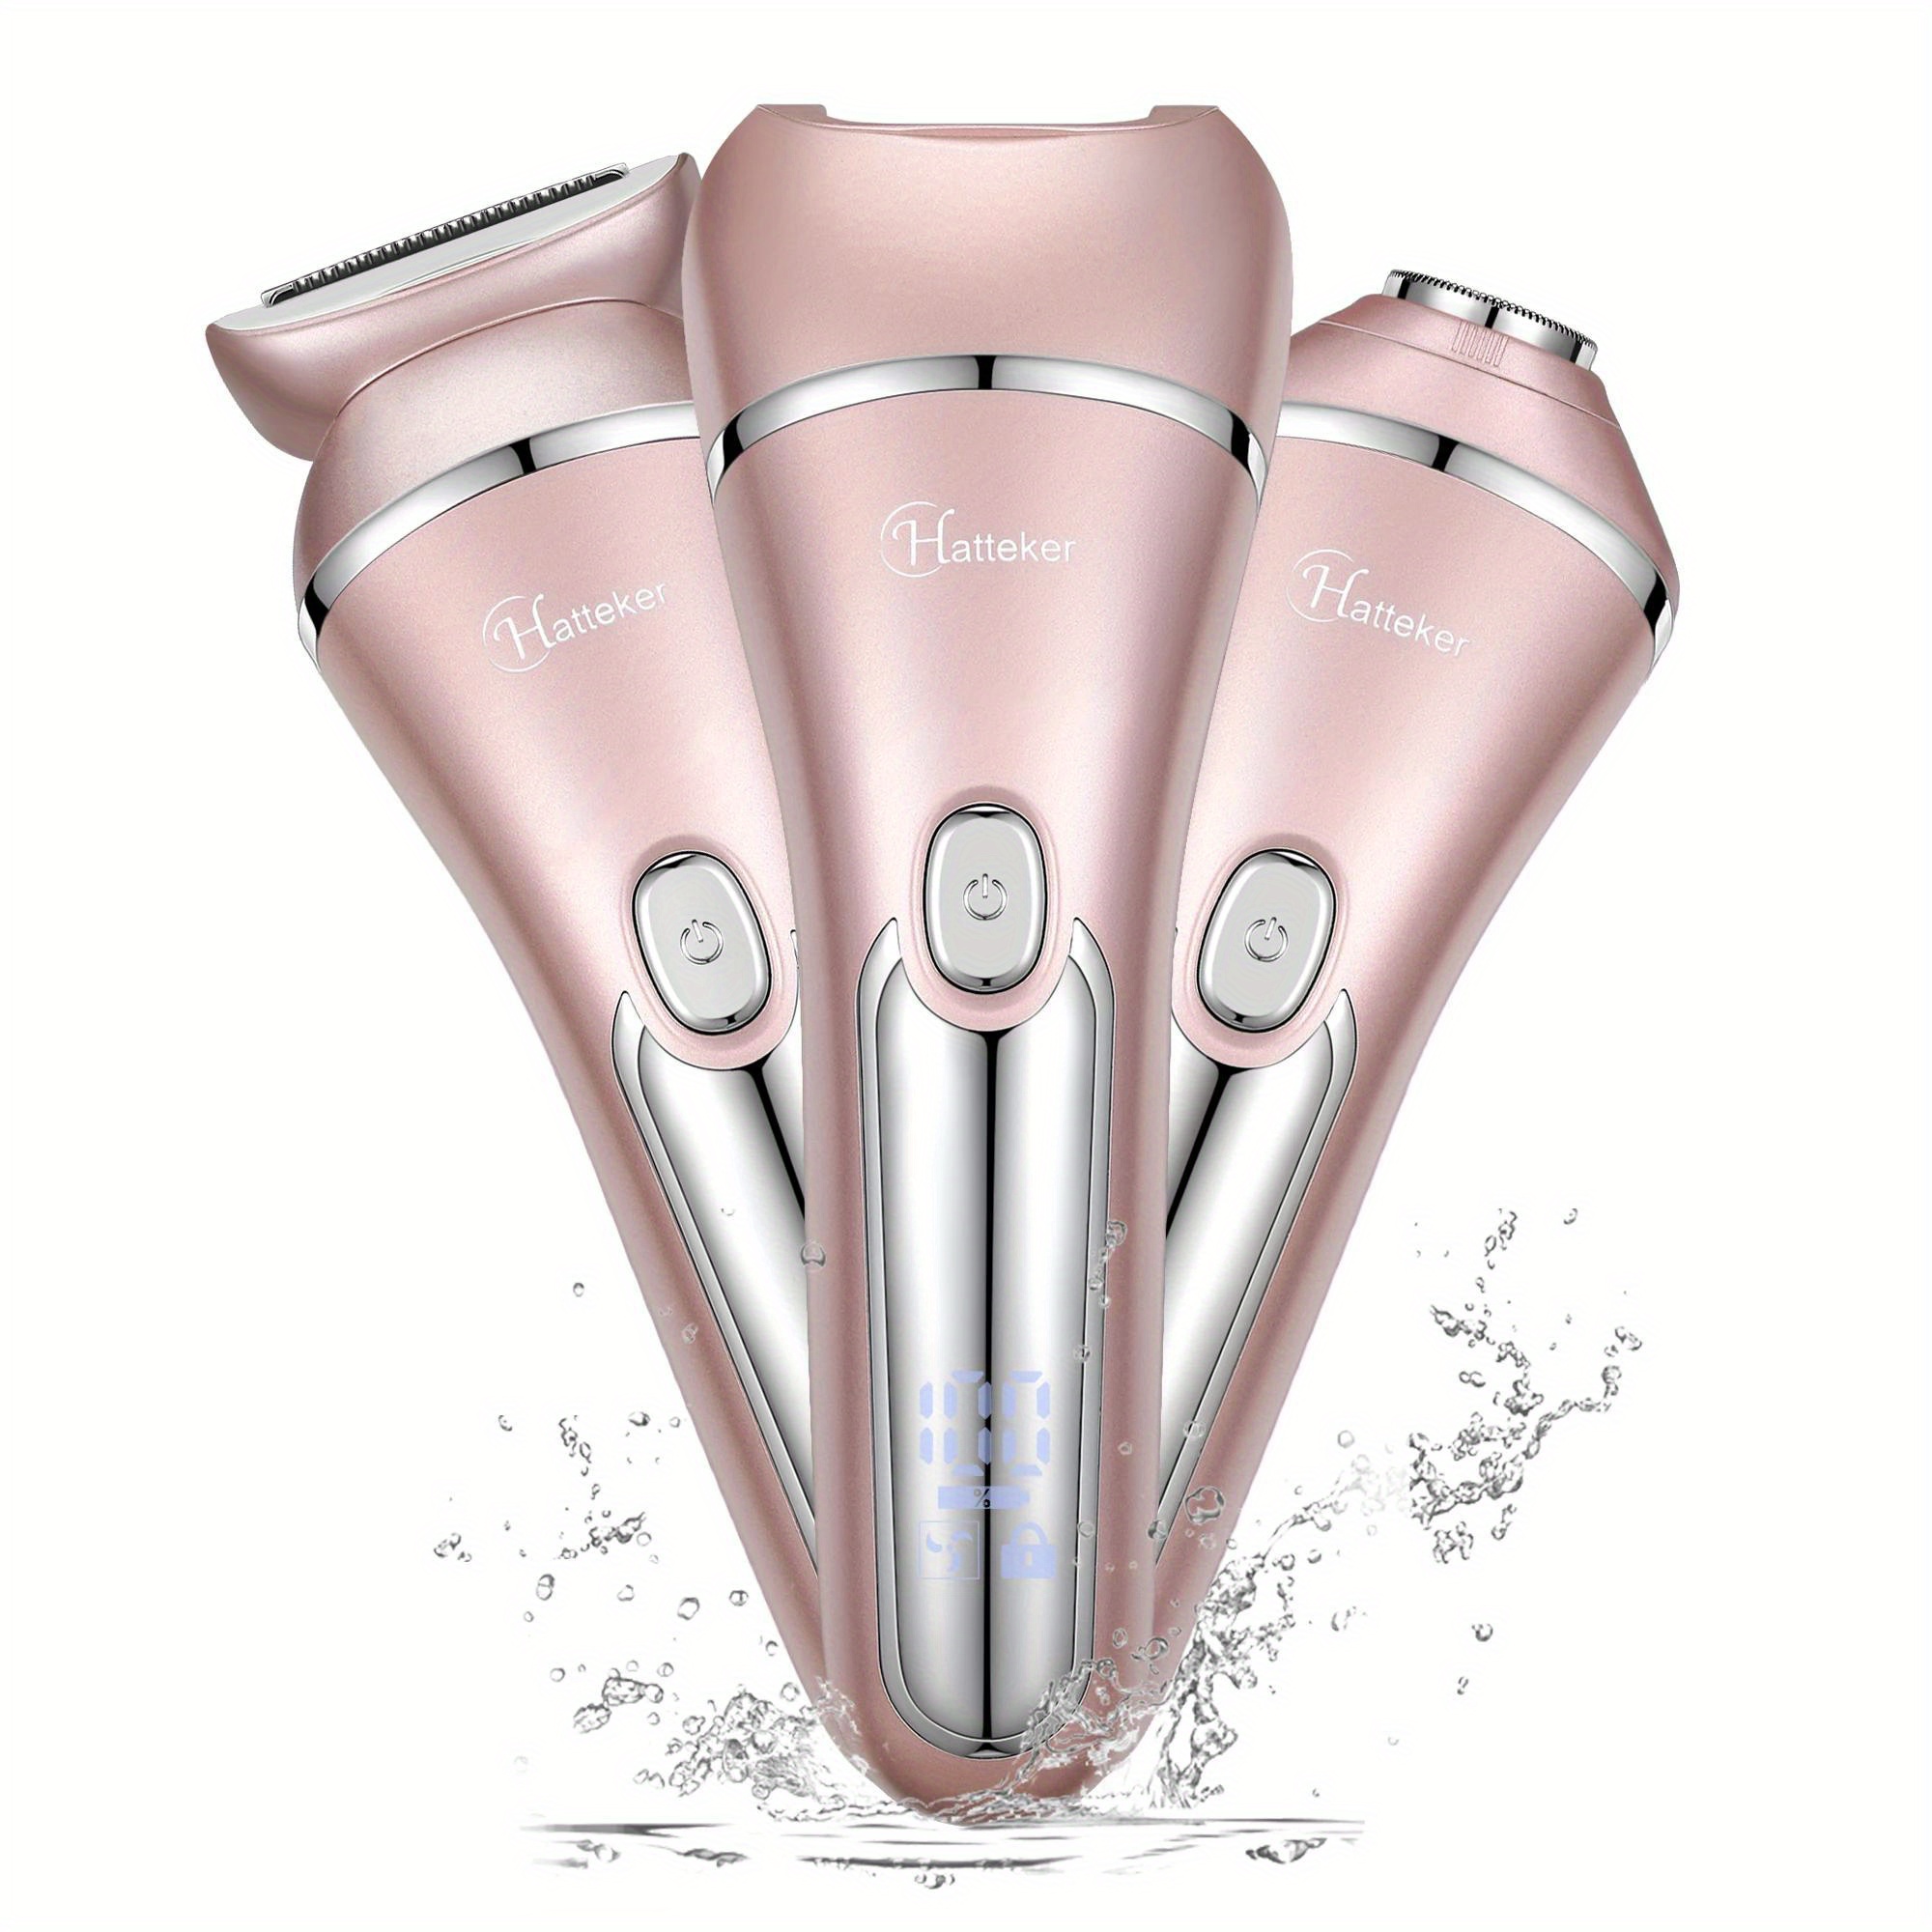 

Electric Epilator, Usb Rechargeable Hair Removal For Women, 3-in-1 Shaver For Legs Arms Underarms Bikini Public Hair Shaver